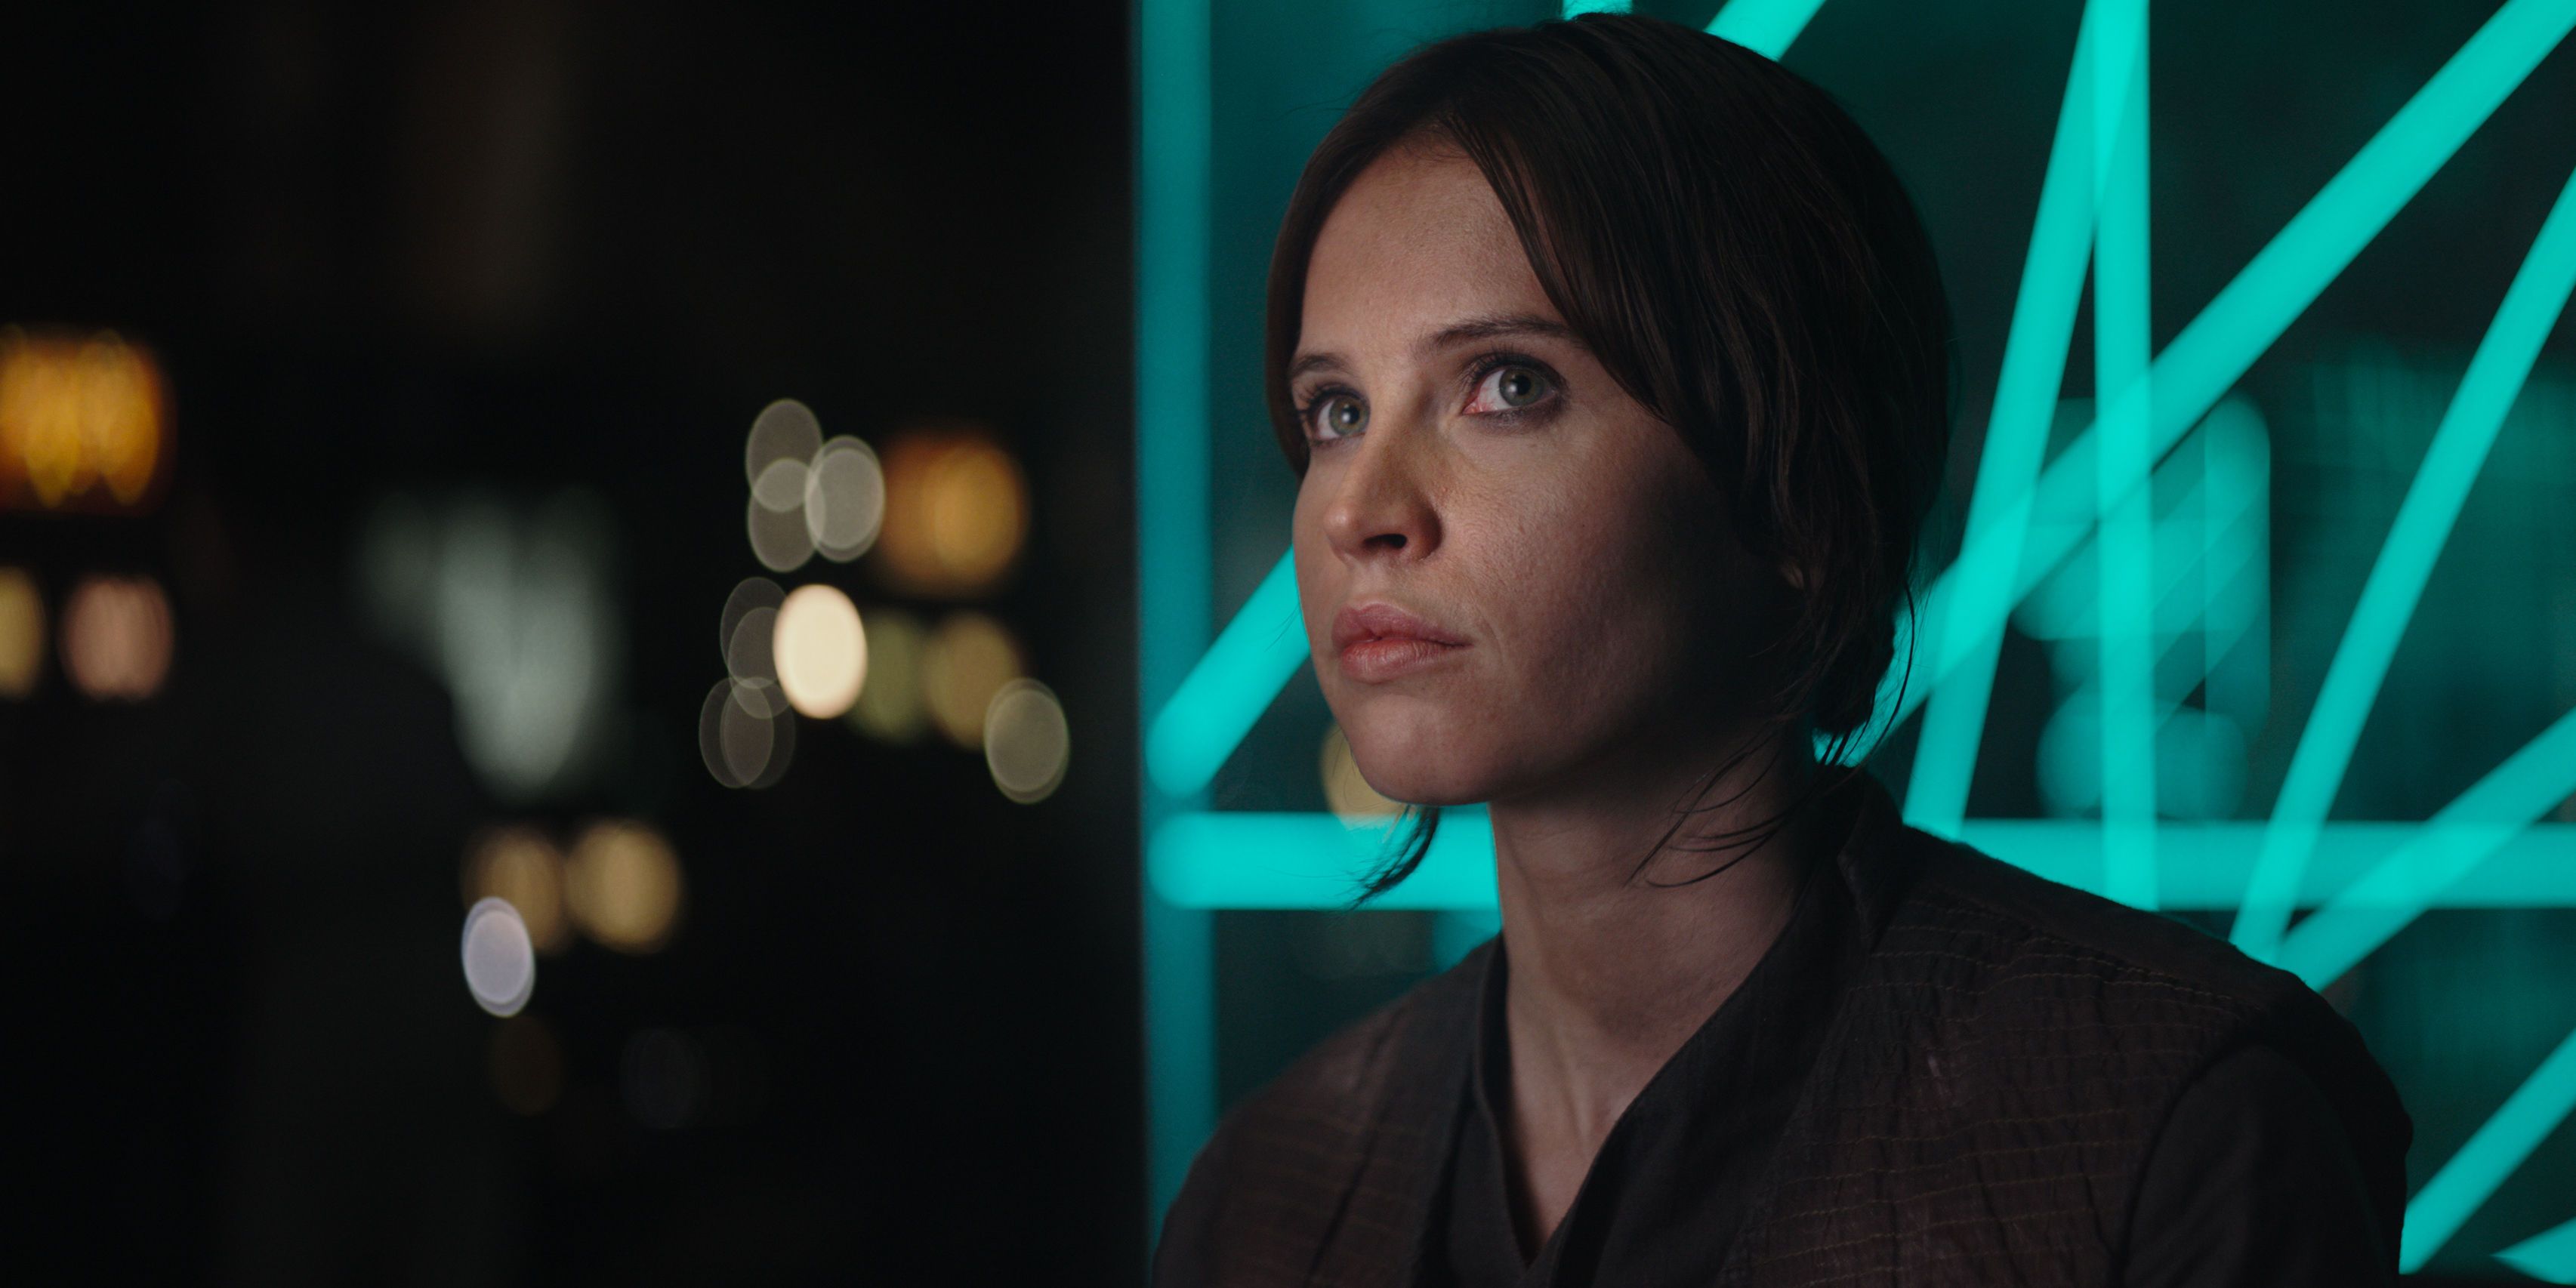 Rogue One Jyn Erso